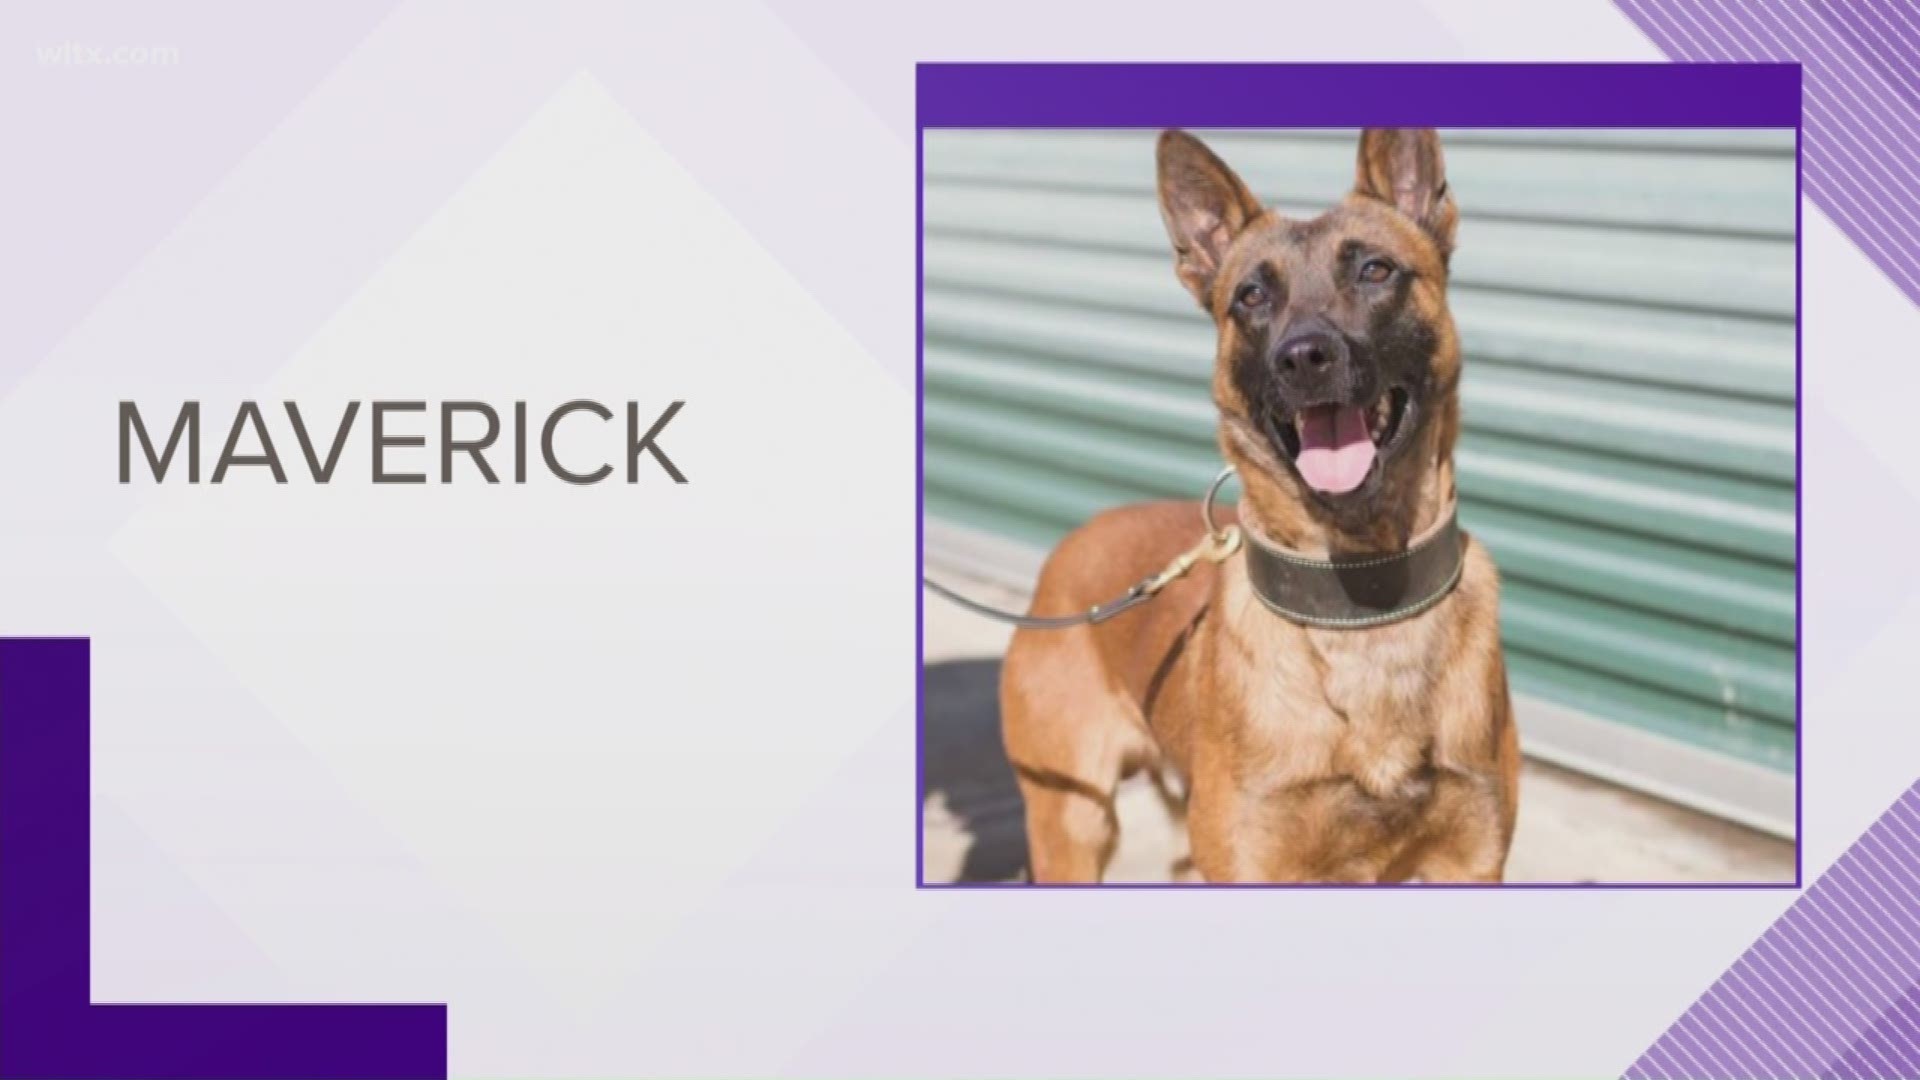 Cause of death for the Cayce K9 Maverick 